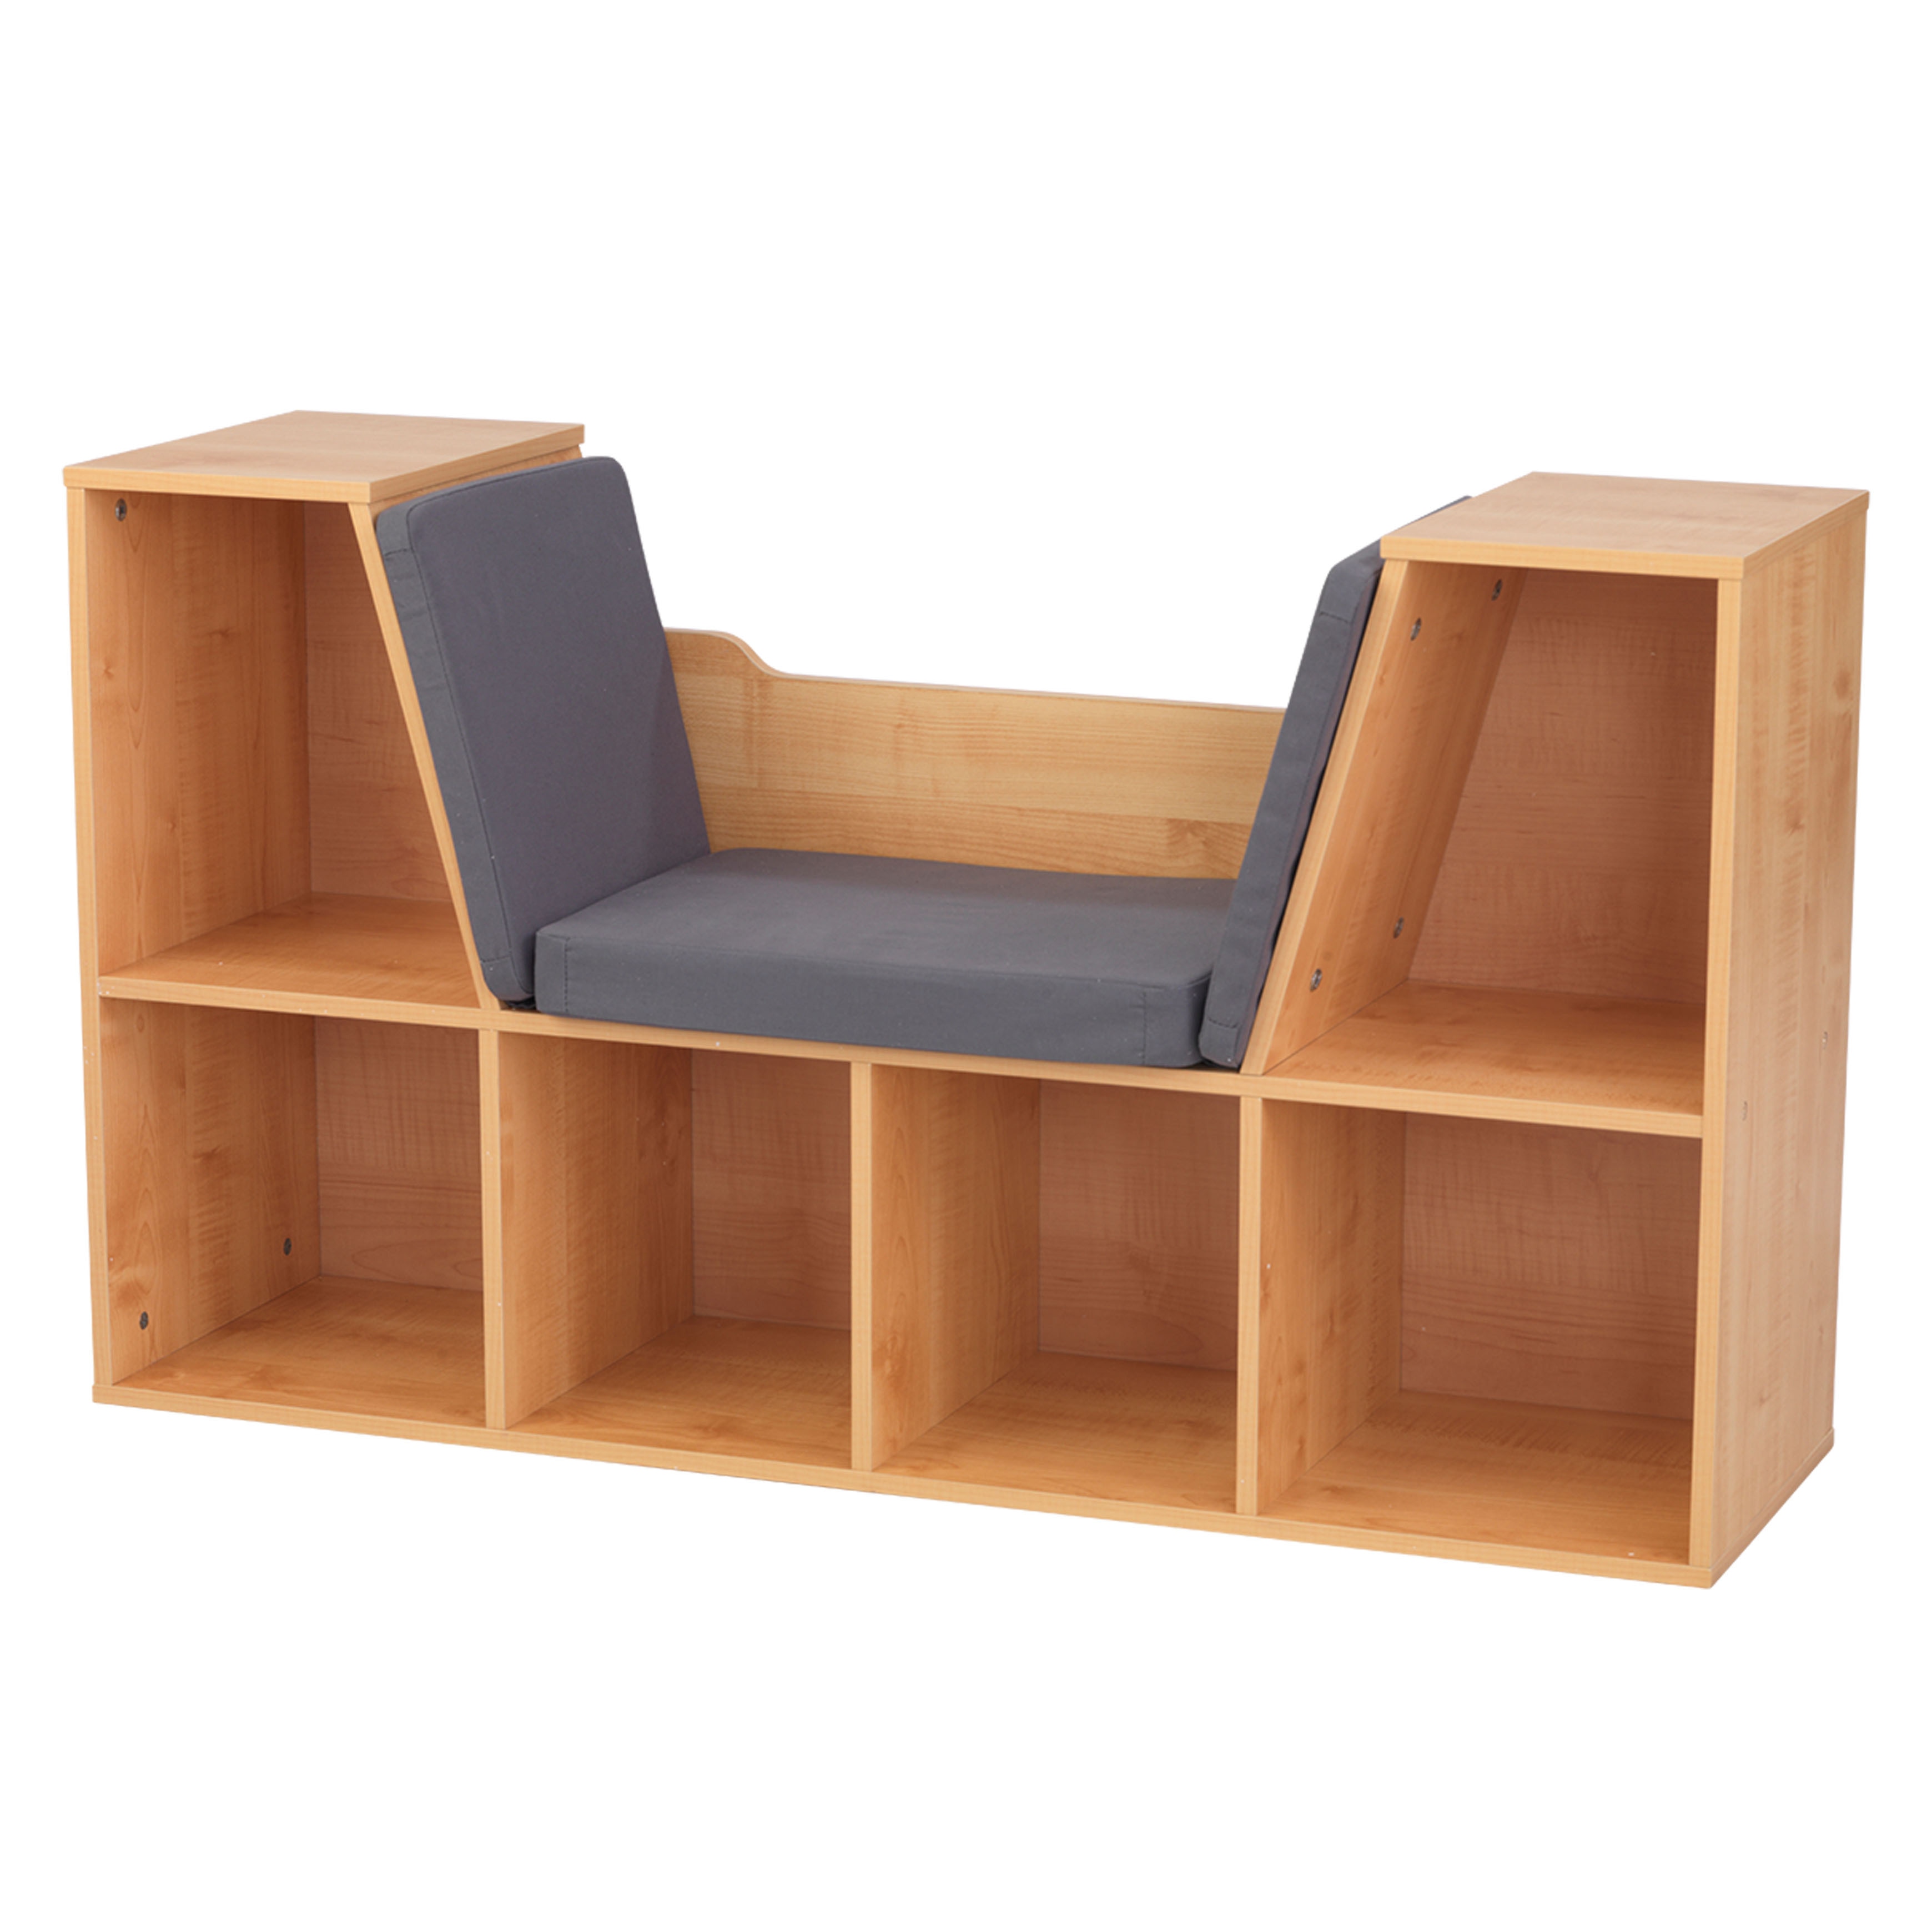 Shop Kidkraft Natural Bookcase With Reading Nook Overstock